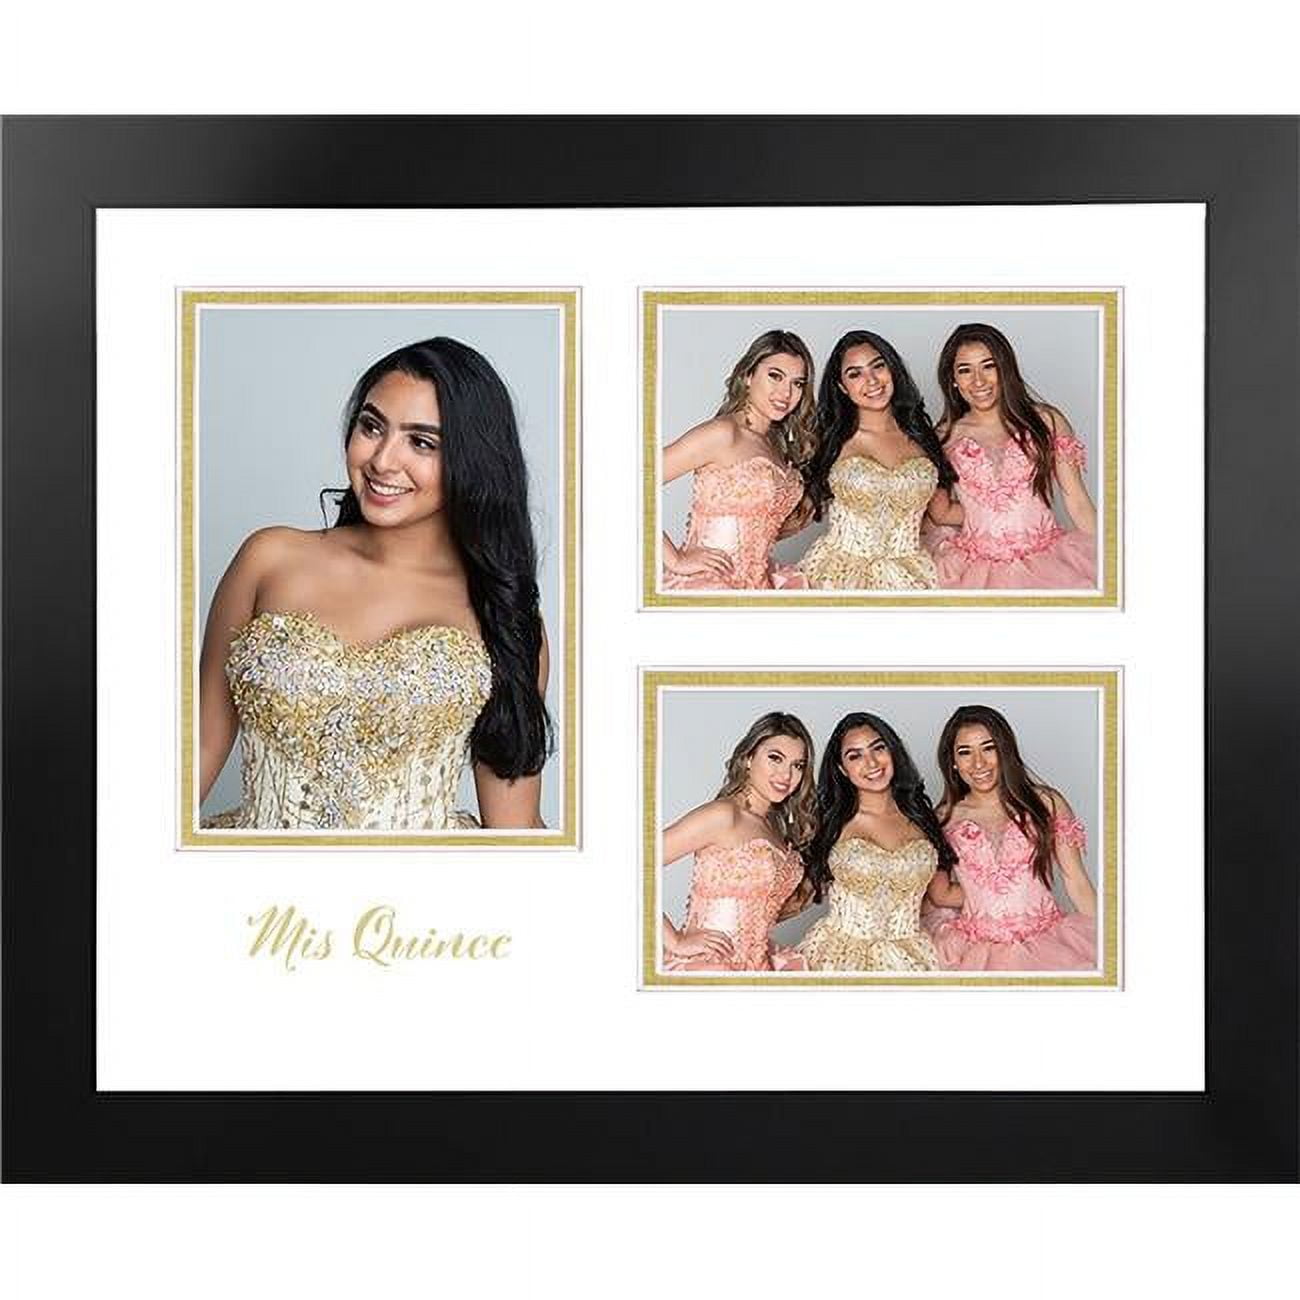 Mqnbwgto Mis Quince Triple Opening Photo Frame White & Gold Mat - Gold Imprint